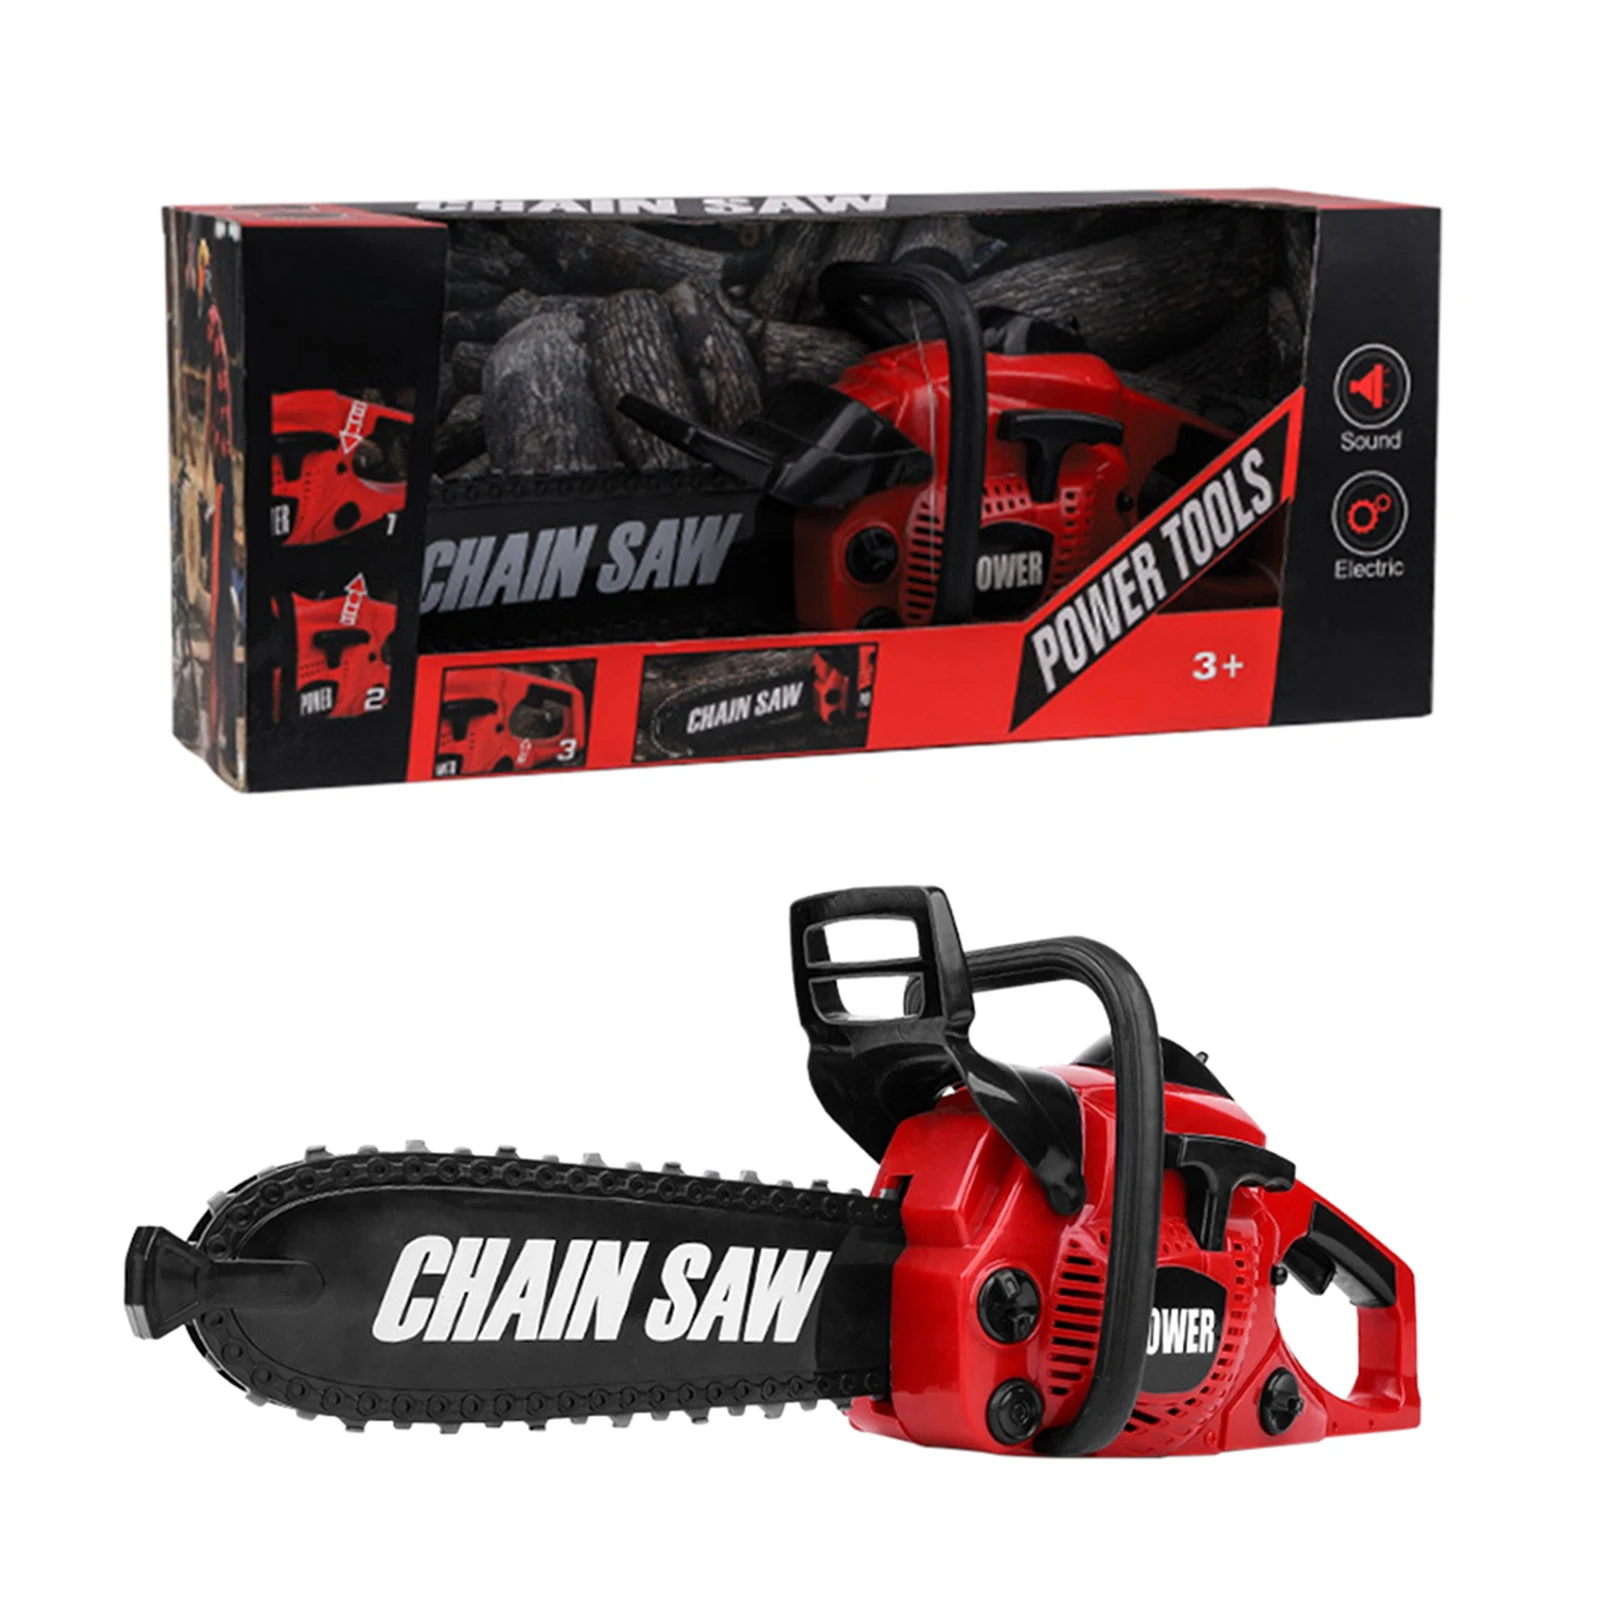 

Chainsaw Toy Work Shop Light And Sound Outside Construction Portable Gardening Kids Gift Battery Operated Preschool Pretend Play